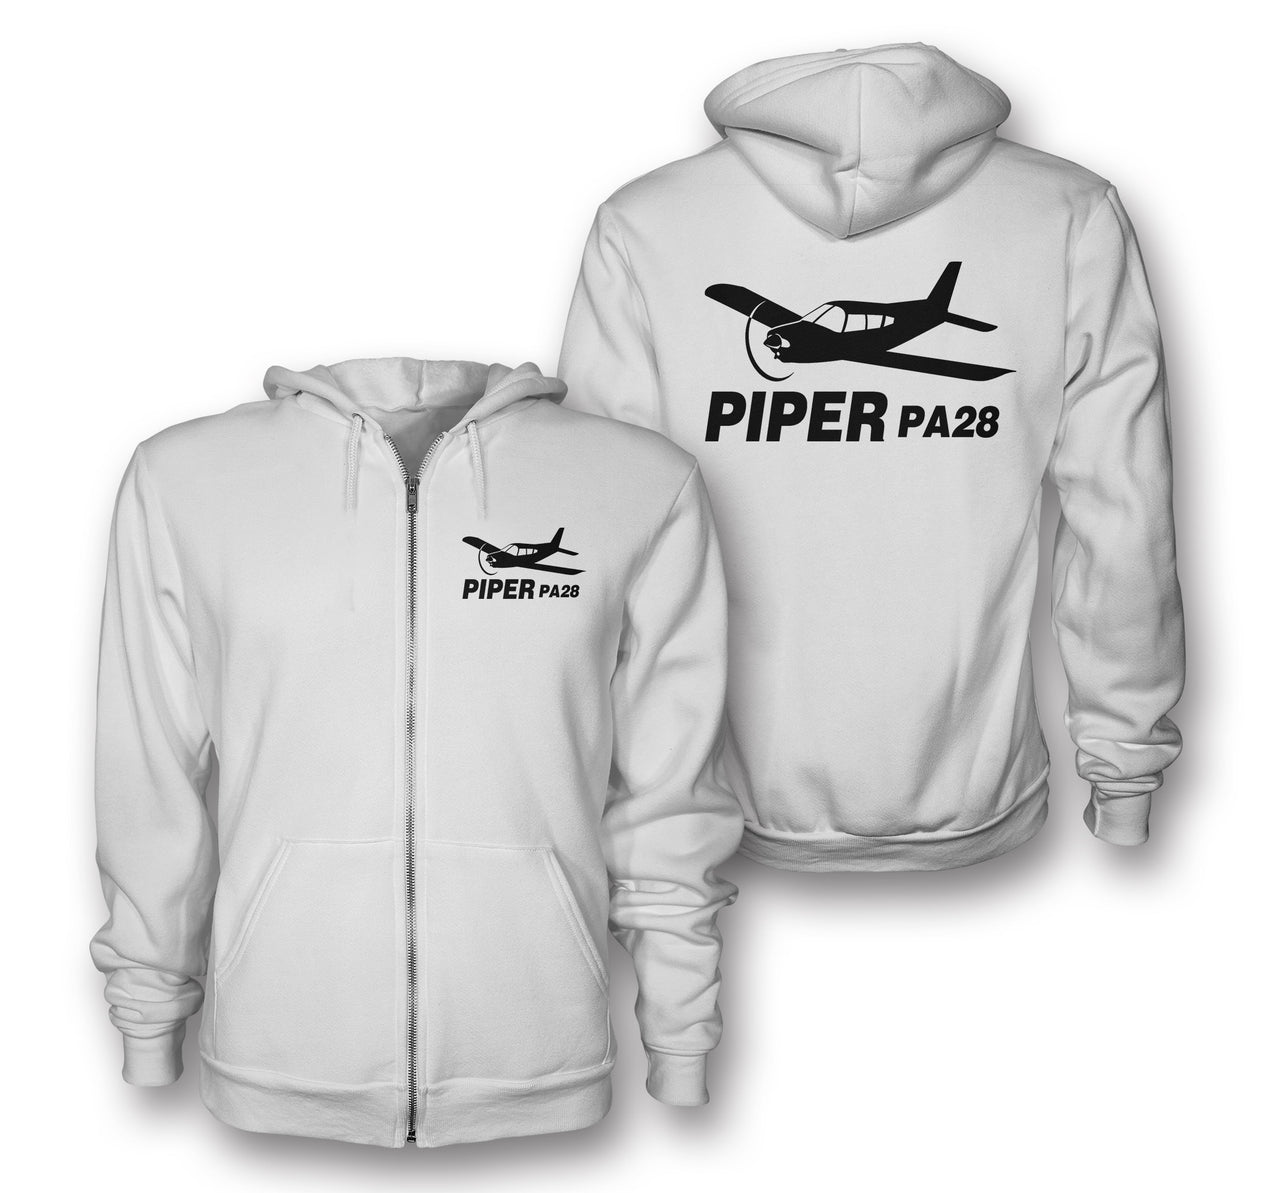 The Piper PA28 Designed Zipped Hoodies